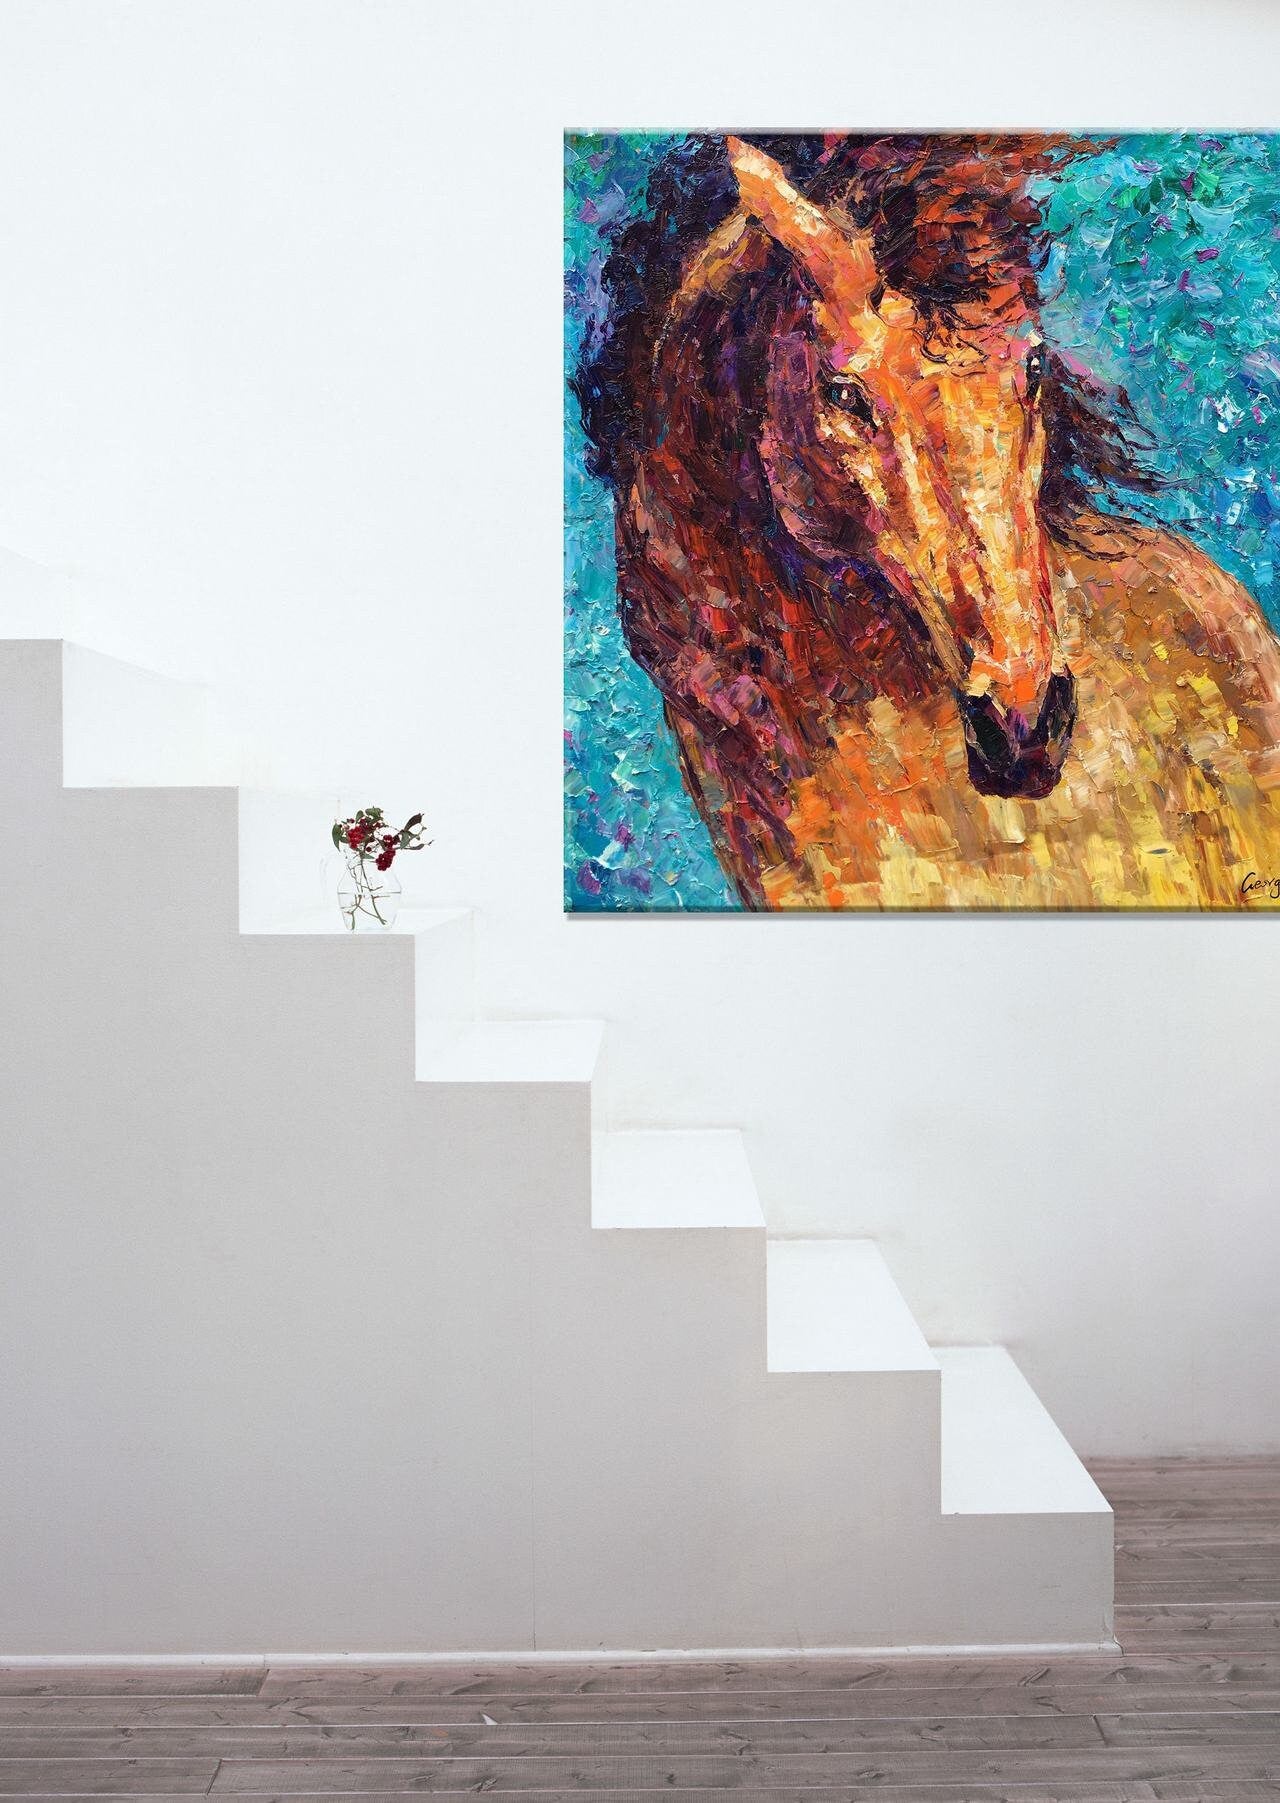 Horse Wall Art, Canvas Wall Decor, Original Abstract Painting, Contemporary Painting, Large Abstract Art, Painting Abstract, Canvas Art